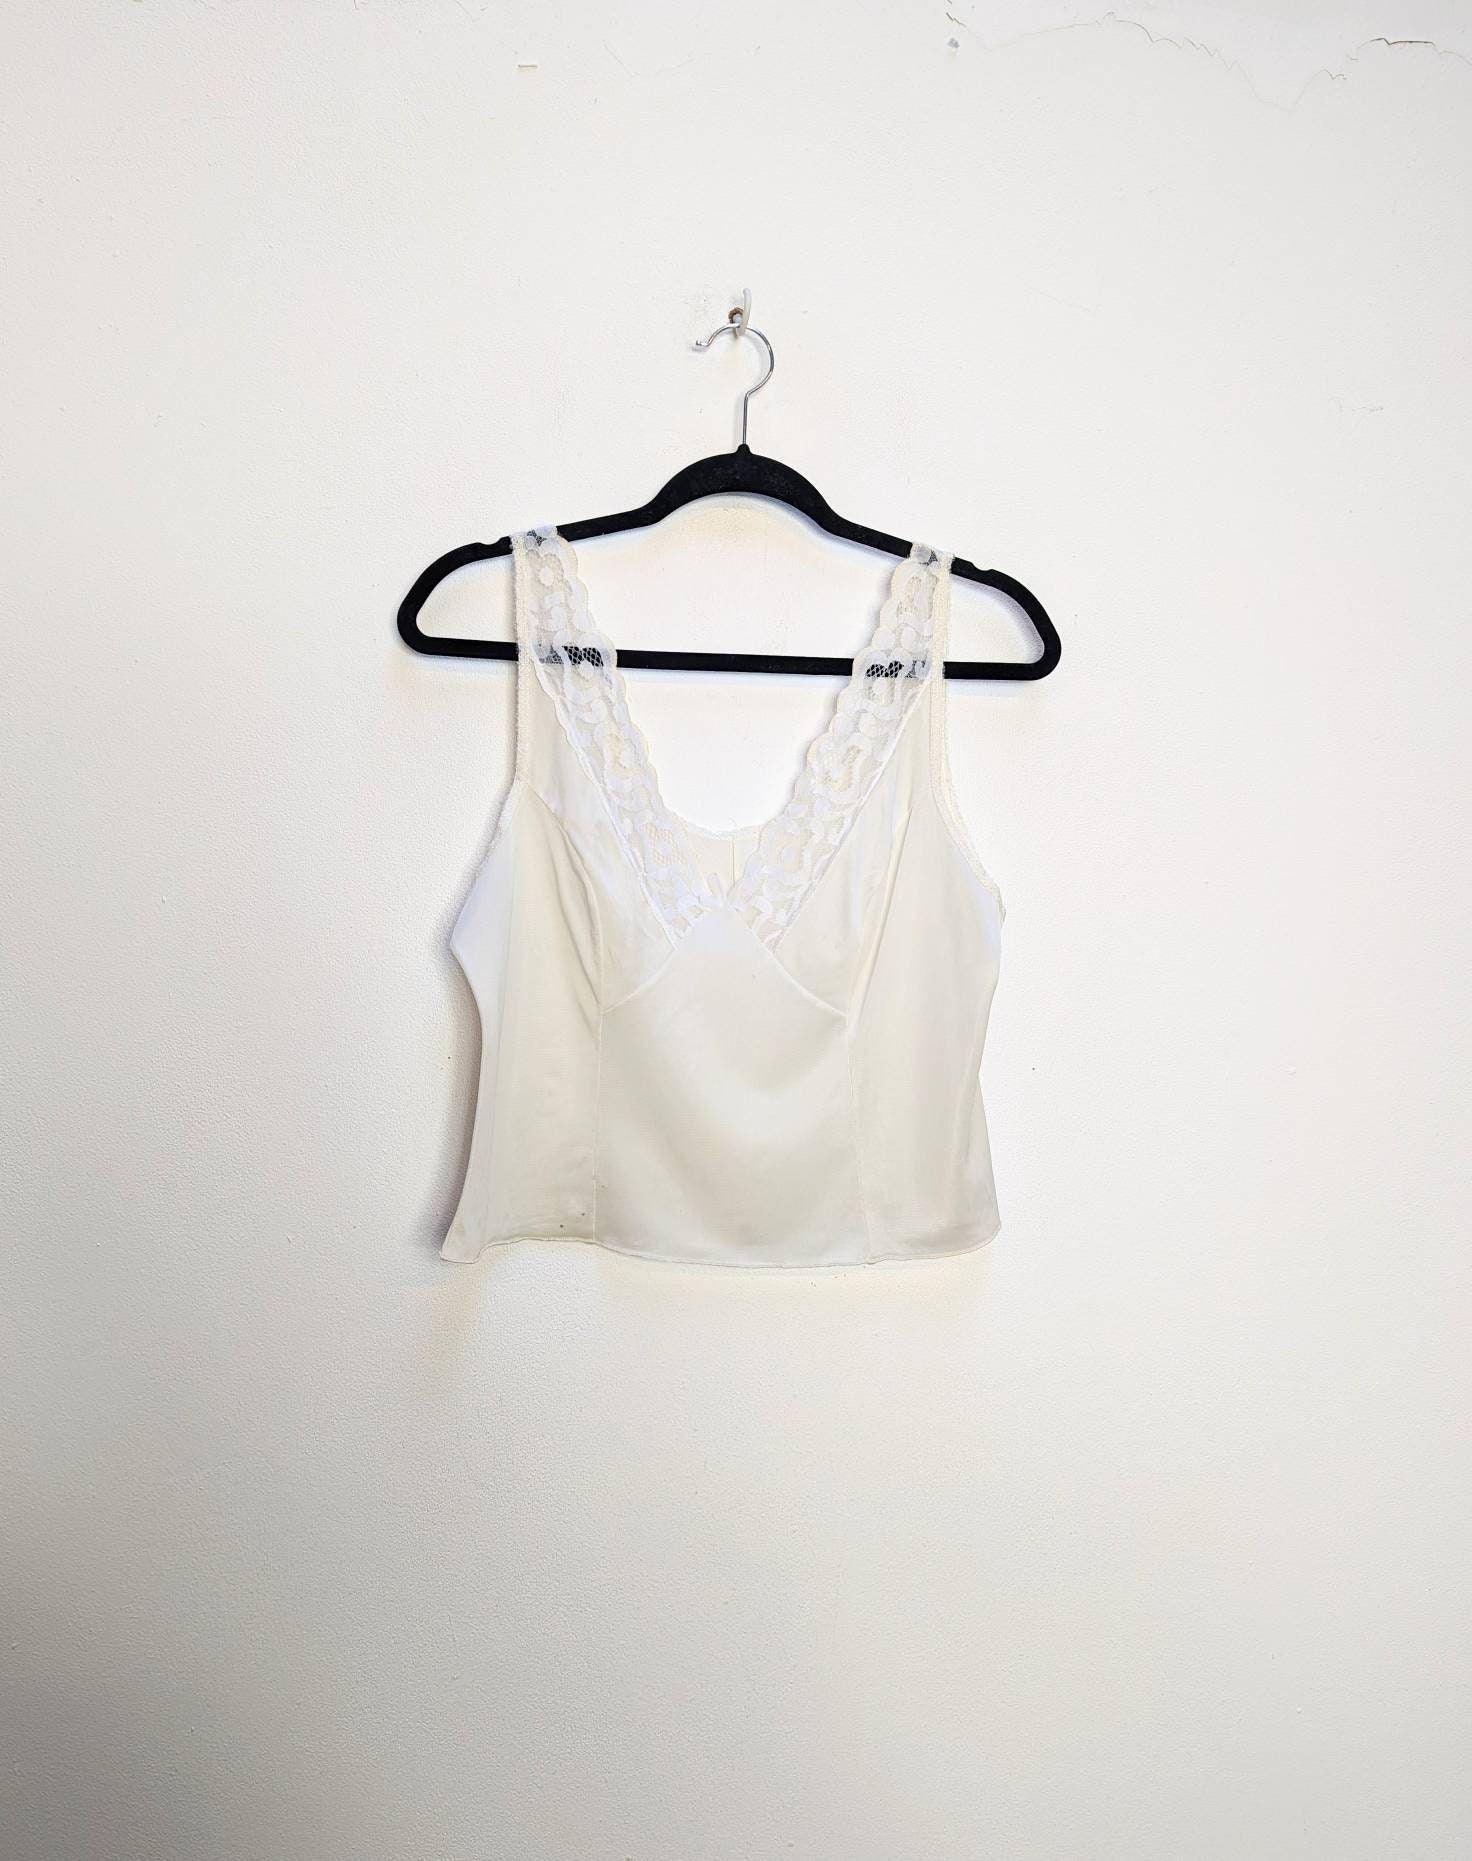 Lace Sheer Camisole for Women Summer Basic Crop Tops Sleeveless V